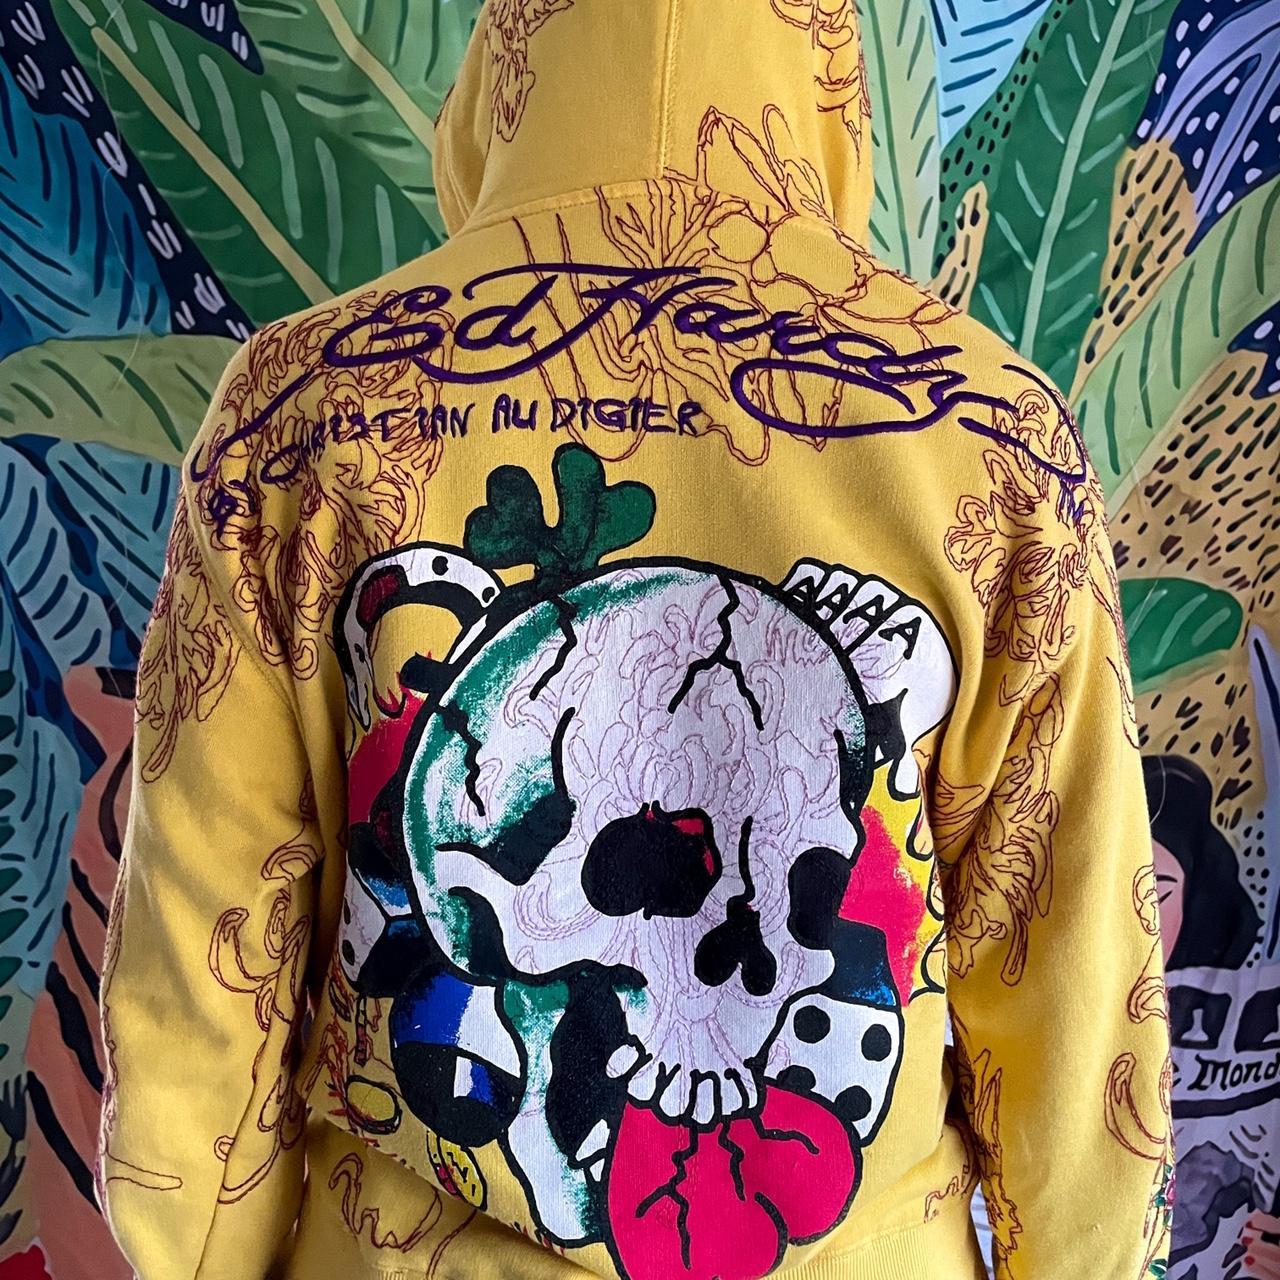 more pictures of the ed hardy jacket look on my... - Depop